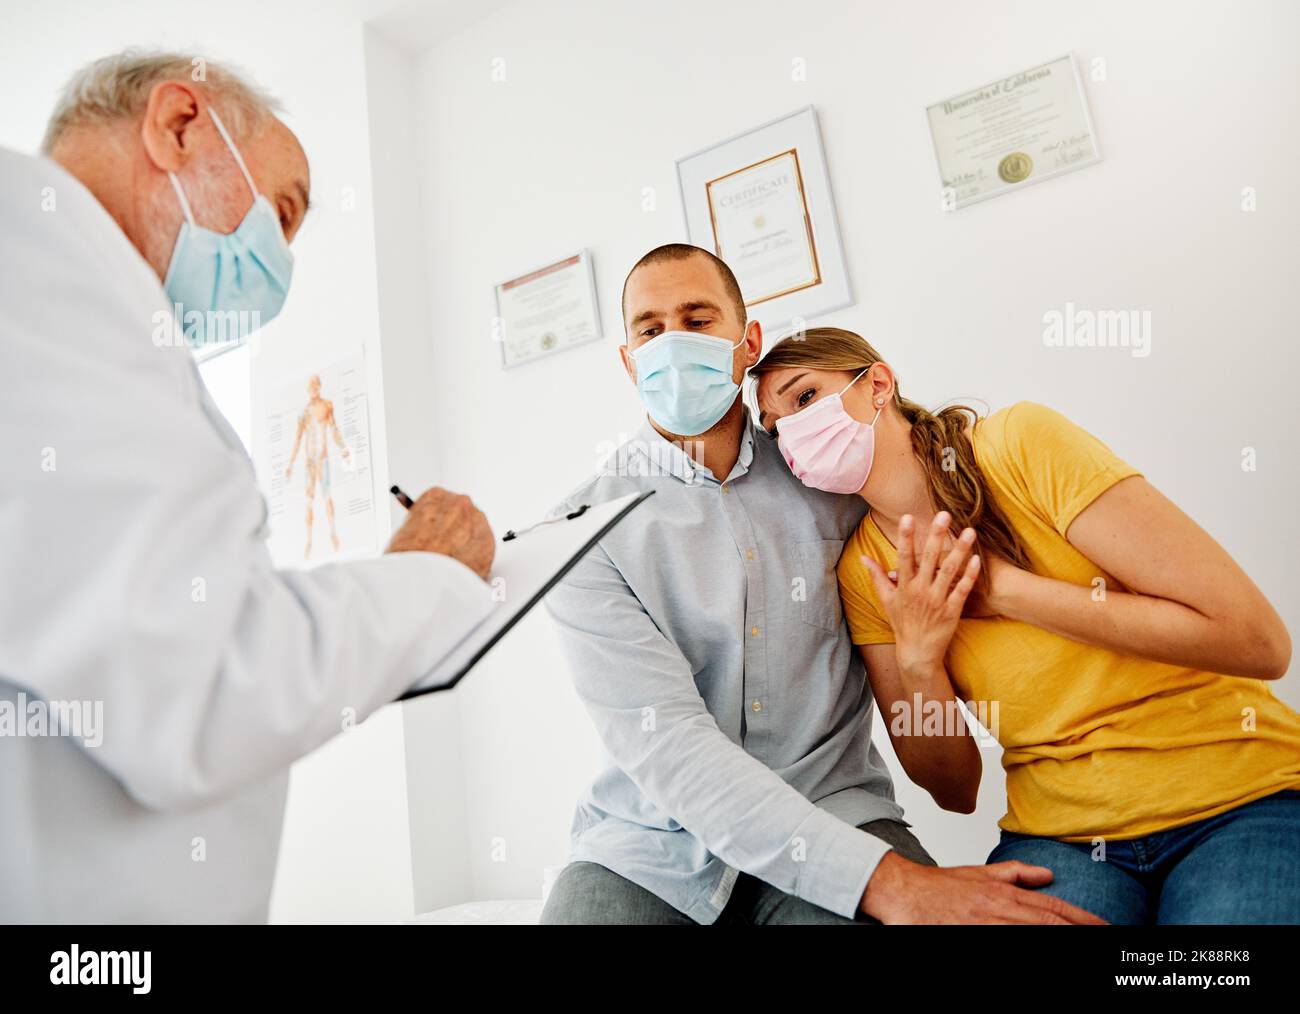 doctor patient woman man couple medical health care family chest pain mask virus medicine problem corona pregnancy Stock Photo